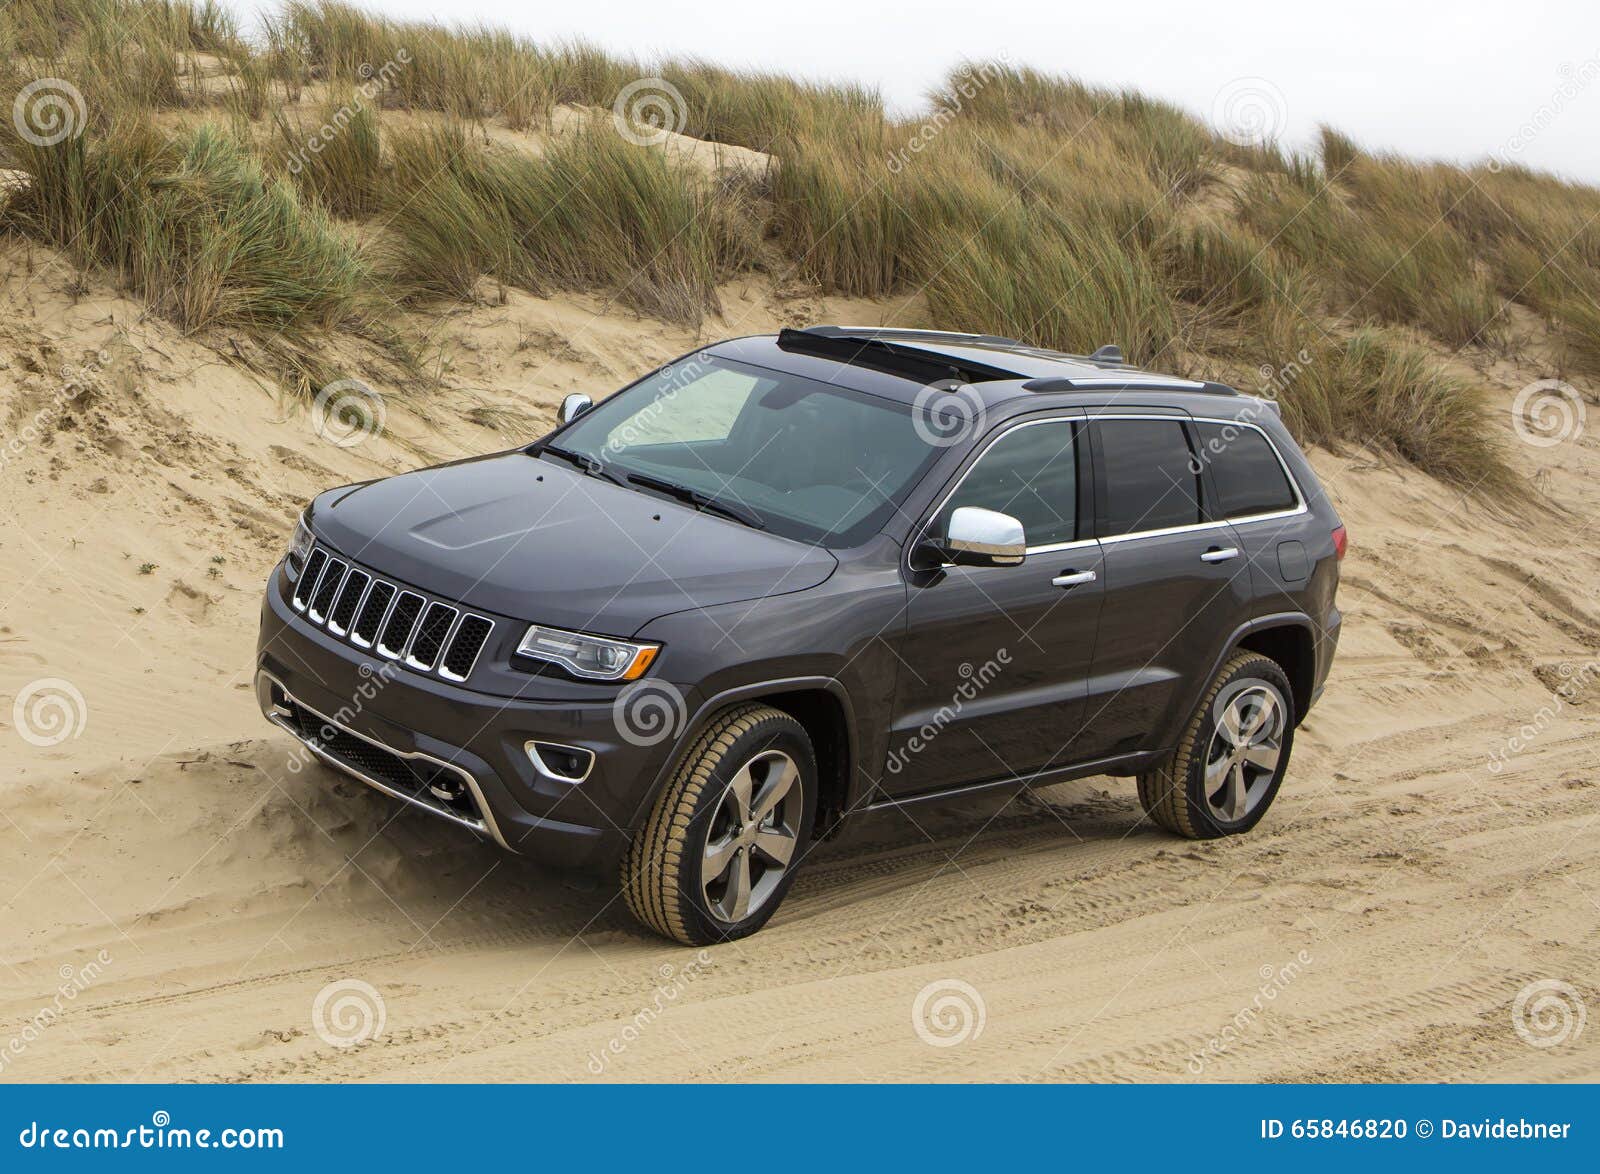 jeep grand cherokee unbranded